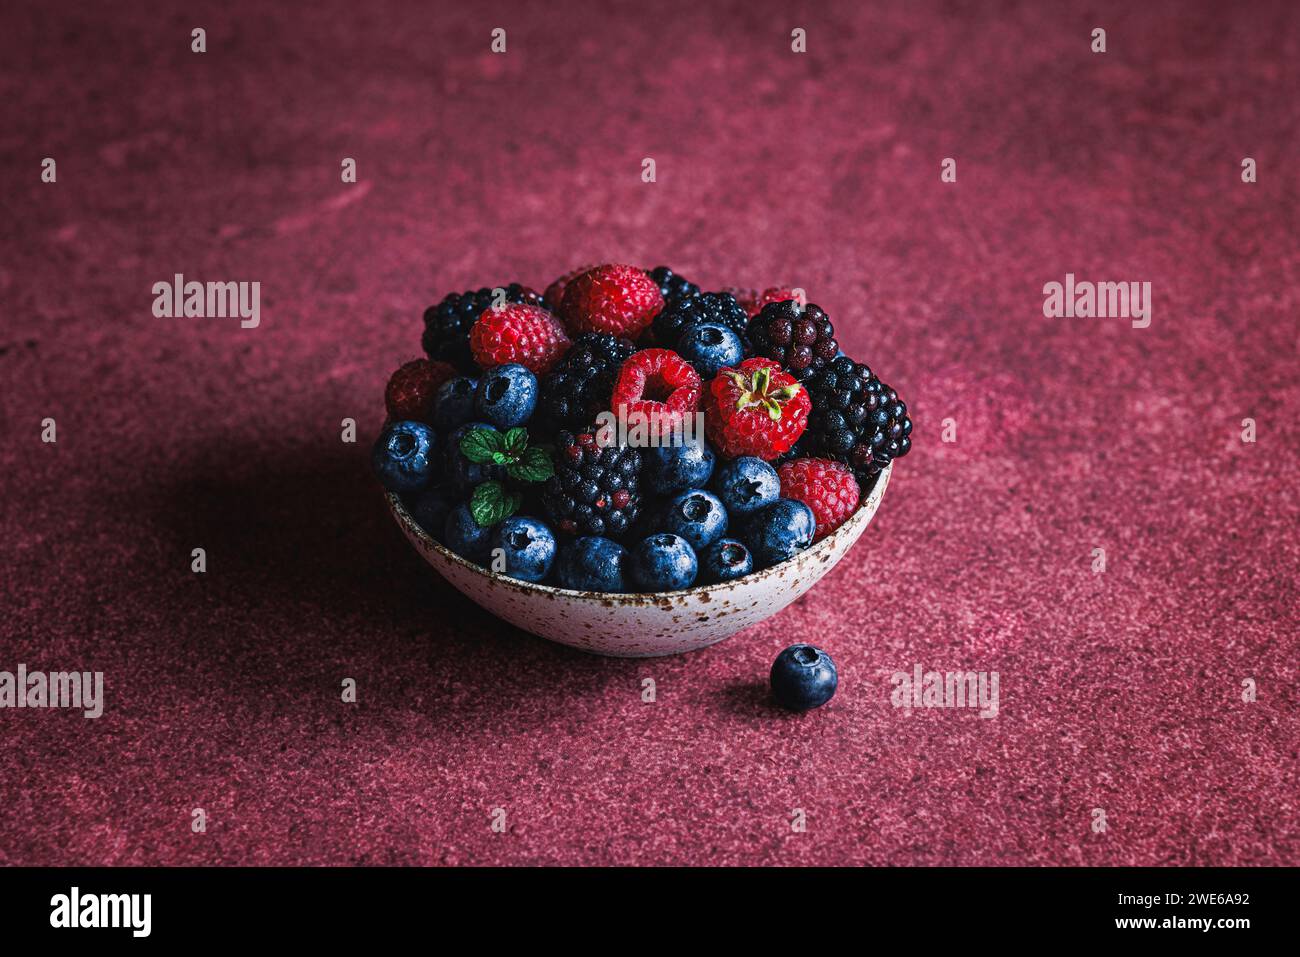 Mixed wild berries in a bowl Stock Photo